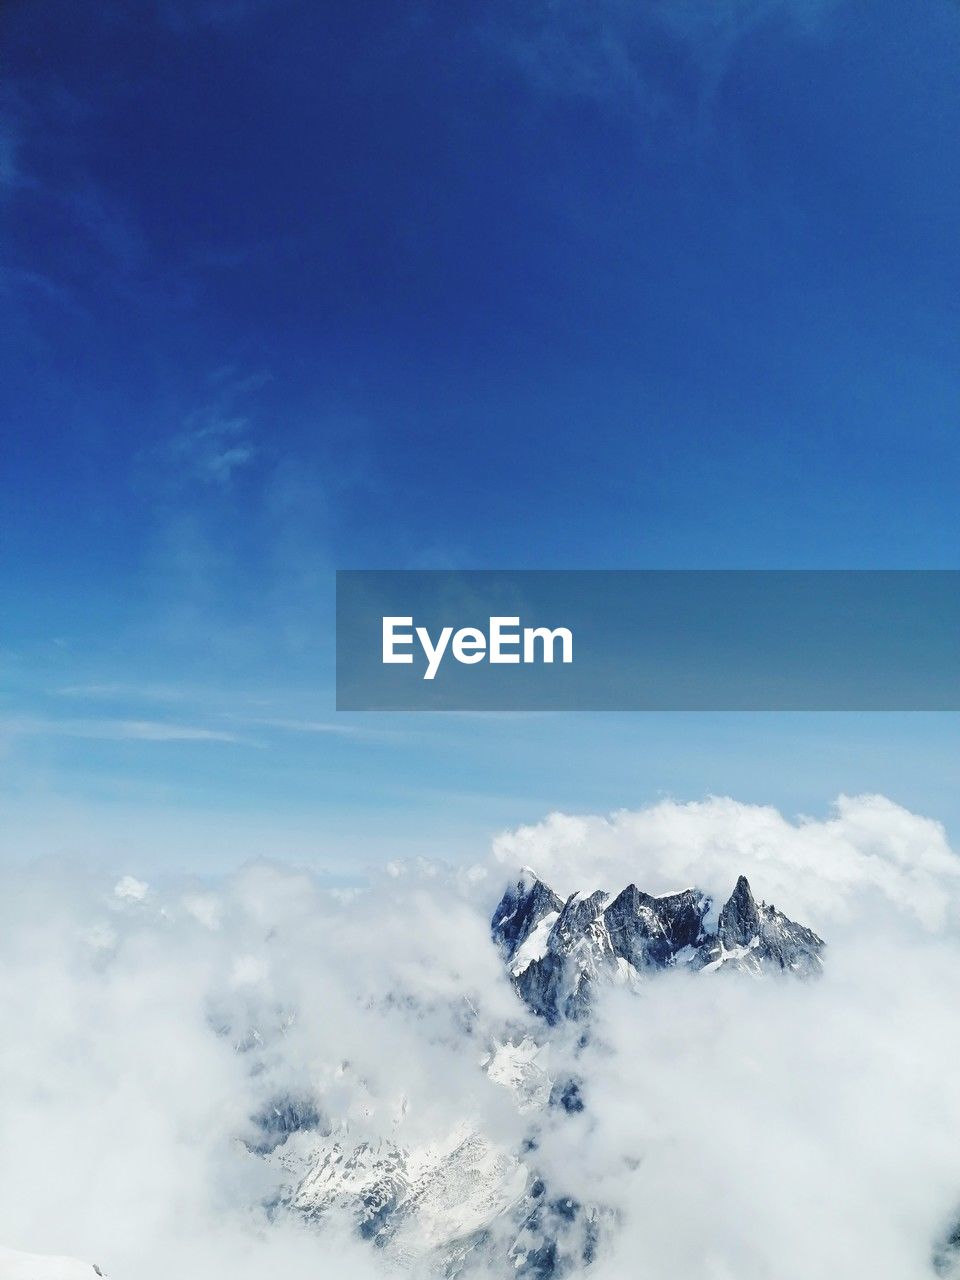 sky, snow, cloud, winter, cold temperature, scenics - nature, mountain, beauty in nature, blue, environment, mountain range, nature, landscape, snowcapped mountain, no people, tranquil scene, tranquility, outdoors, day, copy space, travel, mountain peak, white, idyllic, cloudscape, high up, sunlight, non-urban scene